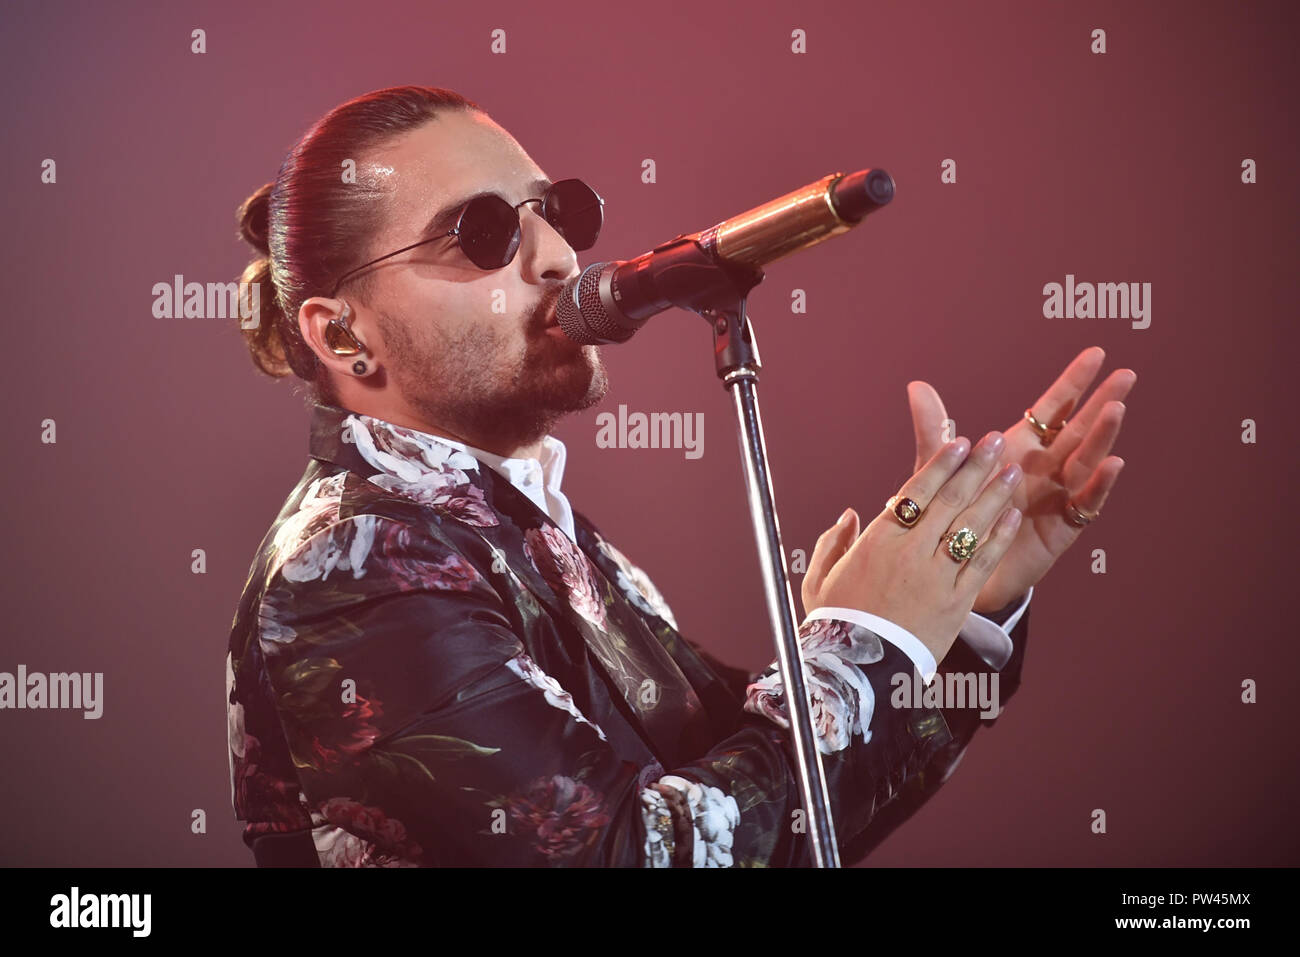 Napoli, Italy. 11th Oct, 2018. Colombian reggae-ton singer and songwriter  Juan Luis Londoño Arias, better known by his stage name Maluma, performs  live on stage at PalaPartenope in Napoli during his "F.A.M.E